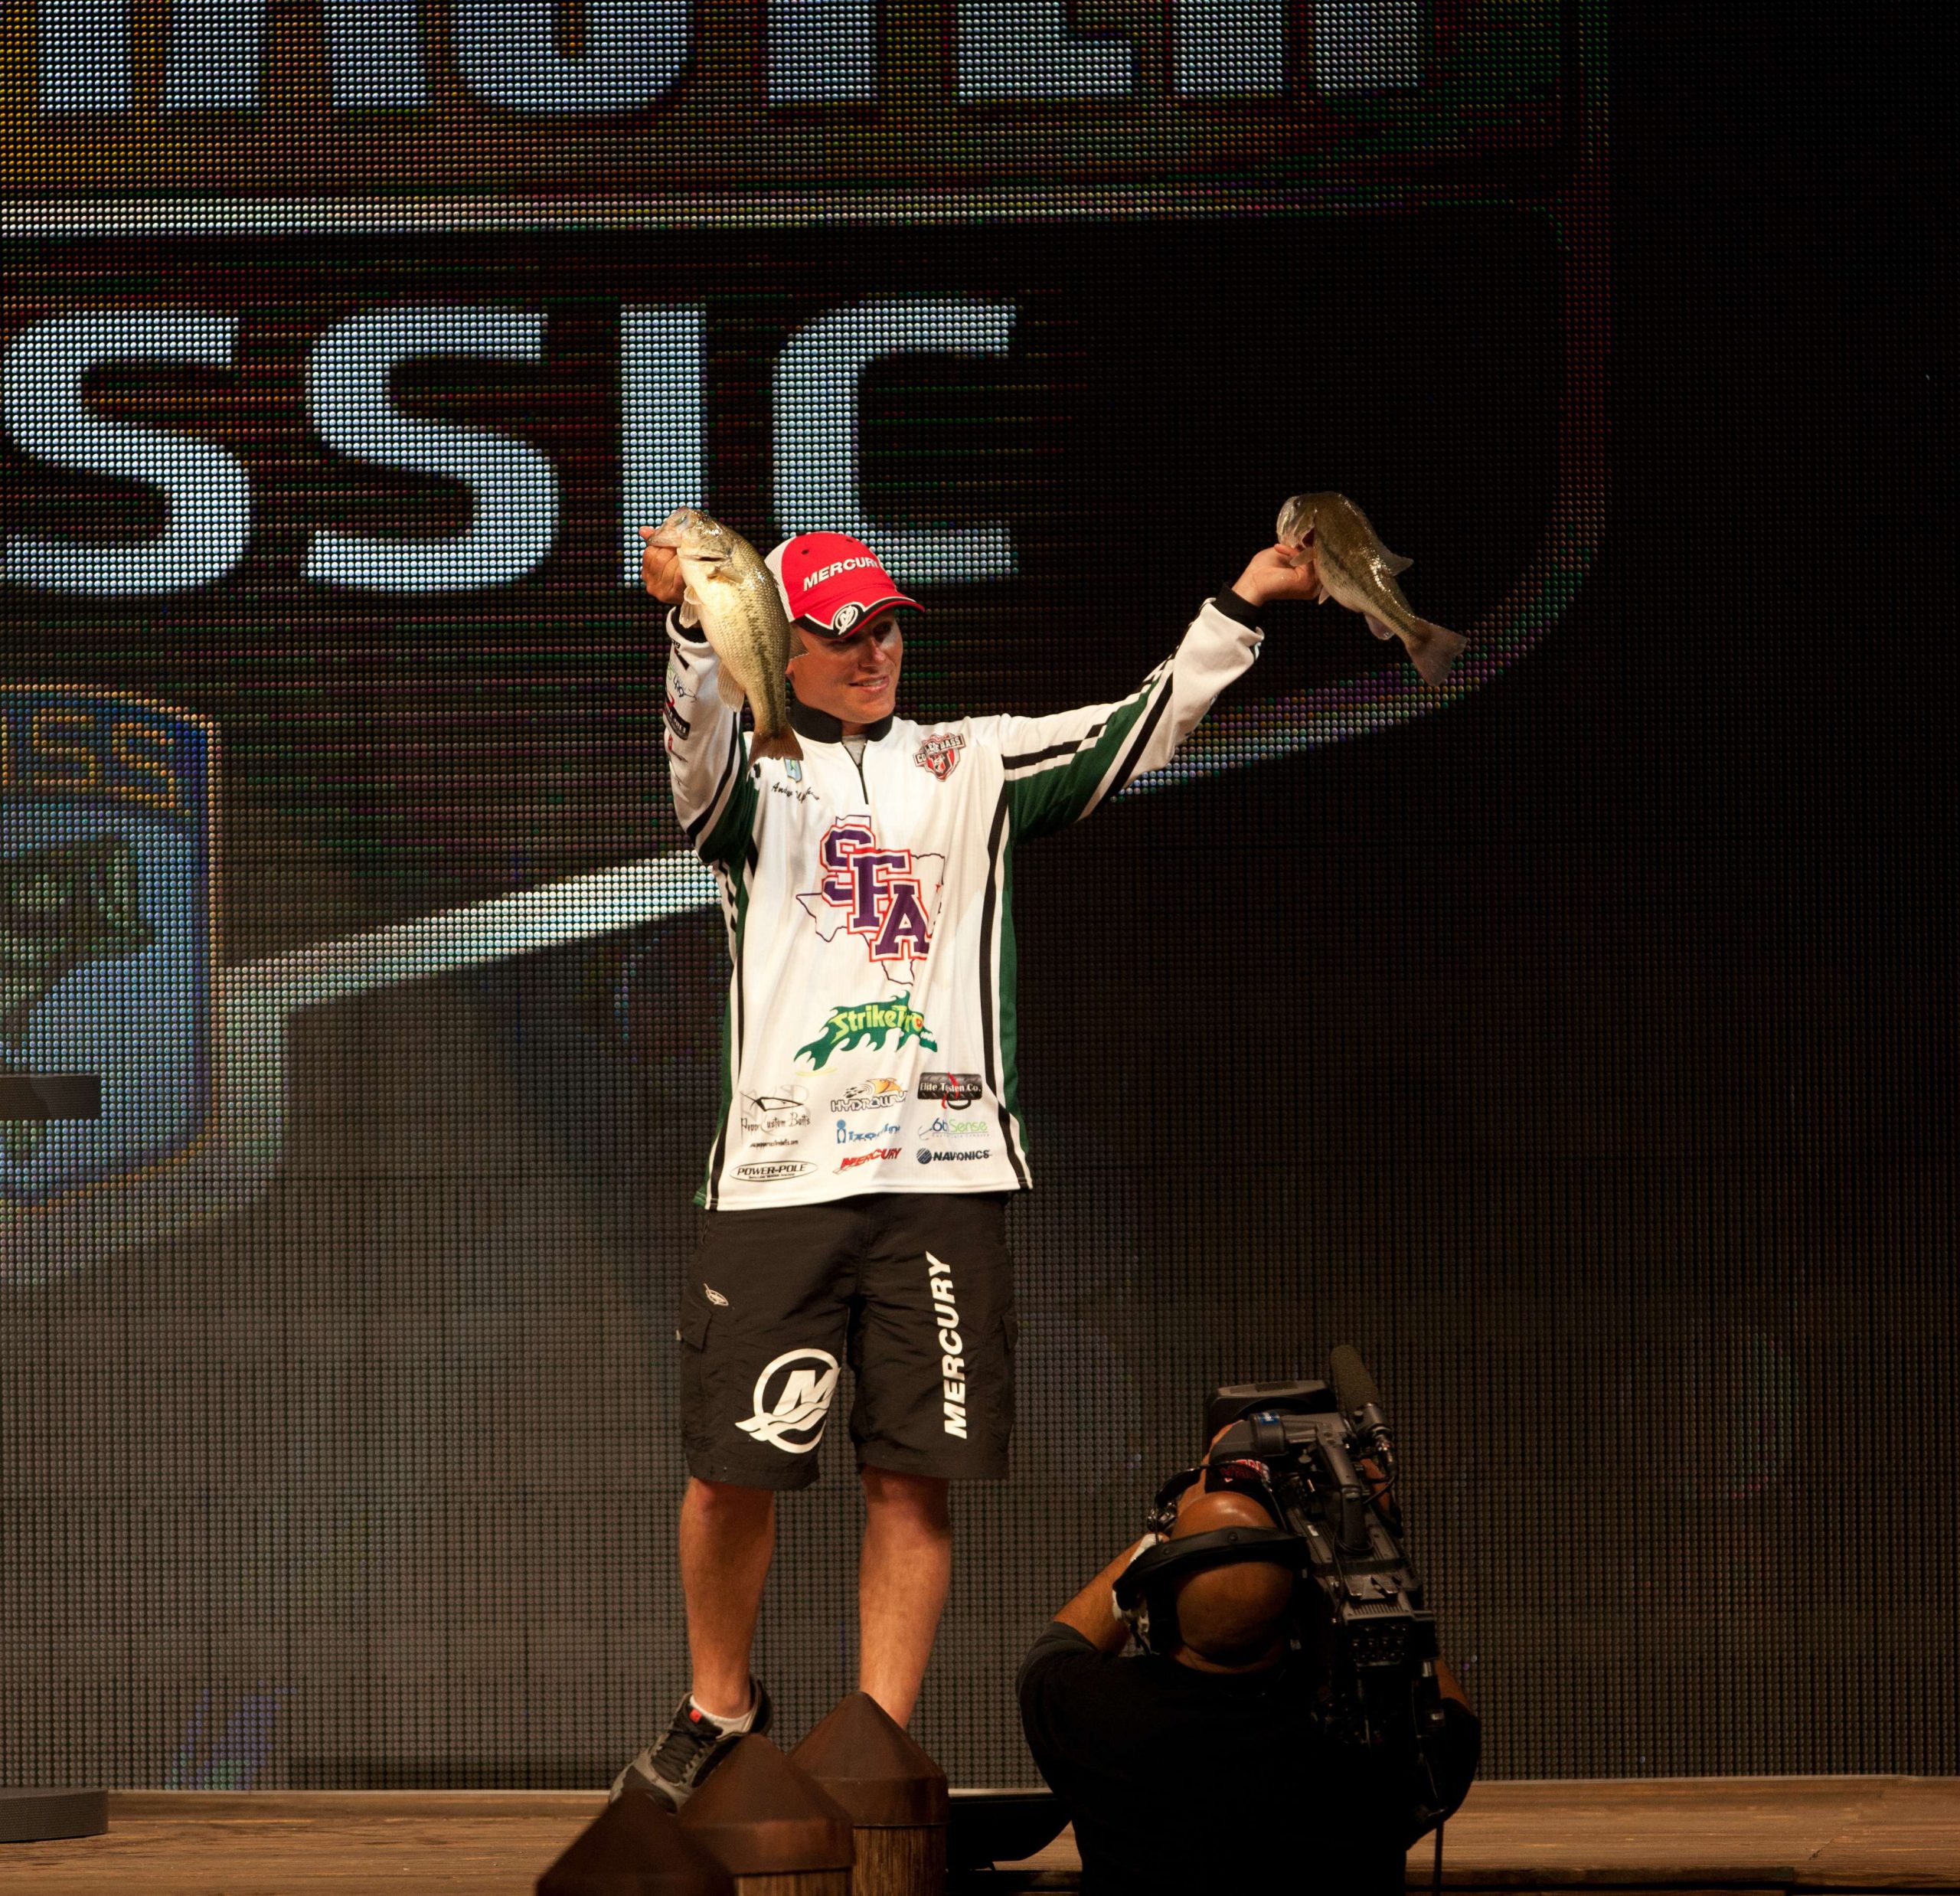 <p><strong><u>First college angler in Classic</u></strong></p>
<p>In 2012, B.A.S.S. began sending its top angler from the Carhartt Bassmaster College Series to the Bassmaster Classic. Andrew Upshaw of Stephen F. Austin University was the first to qualify. </p>
